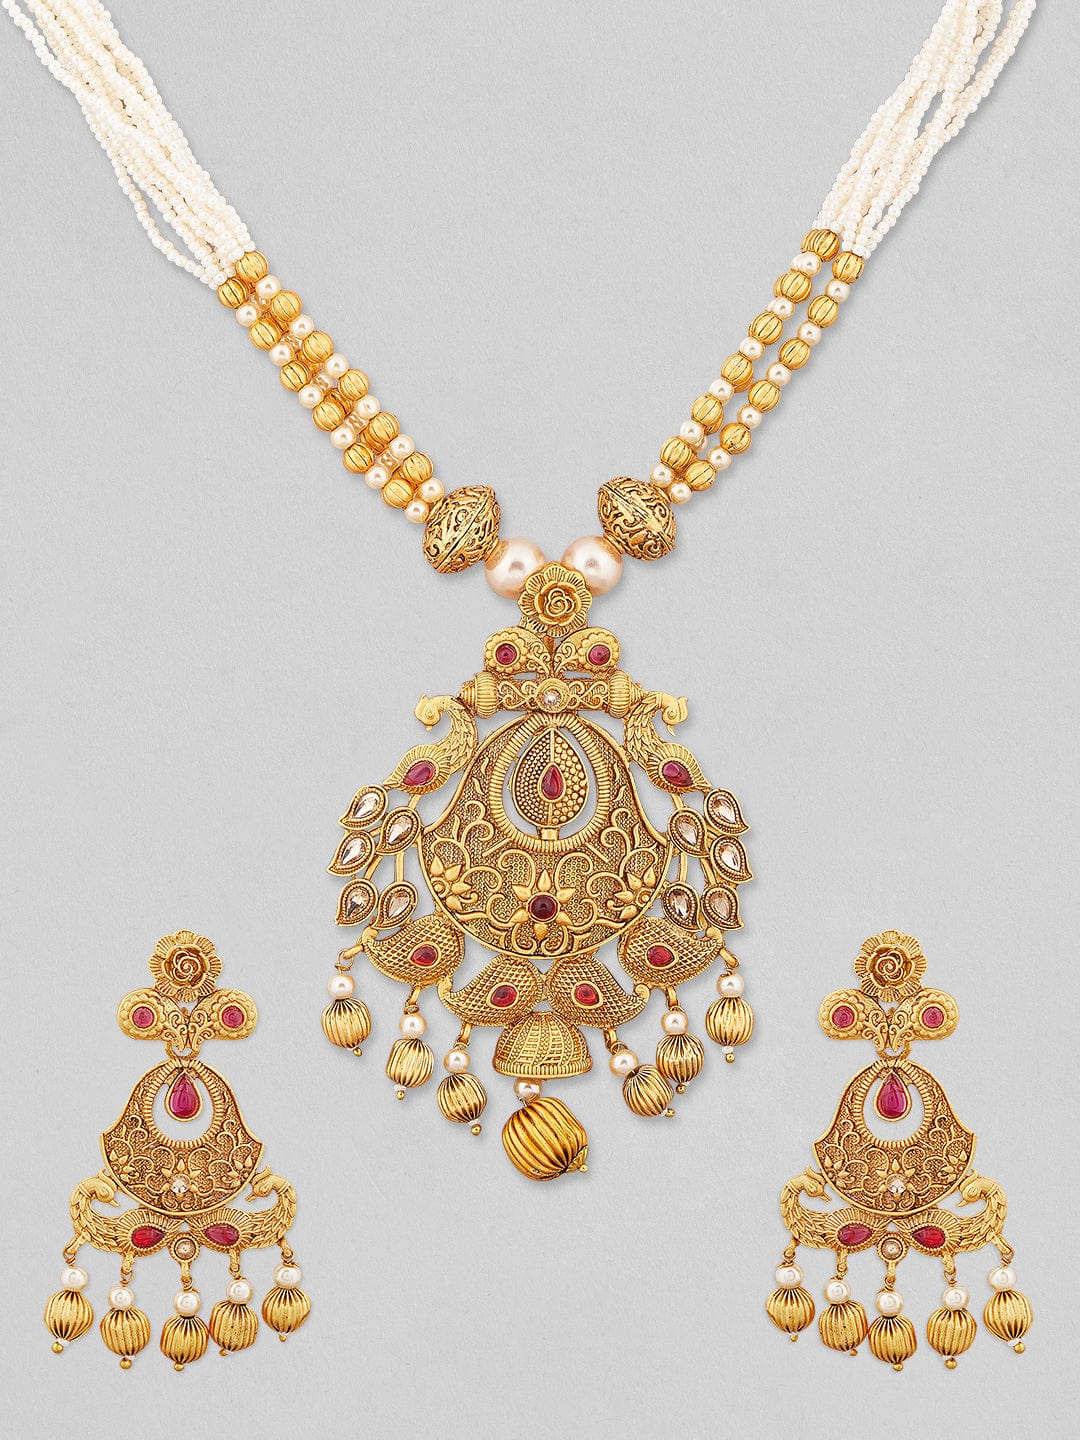 Rubans 24k Gold Plated Necklace With Peacock Motif Design And Red Stones. Jewelry Sets